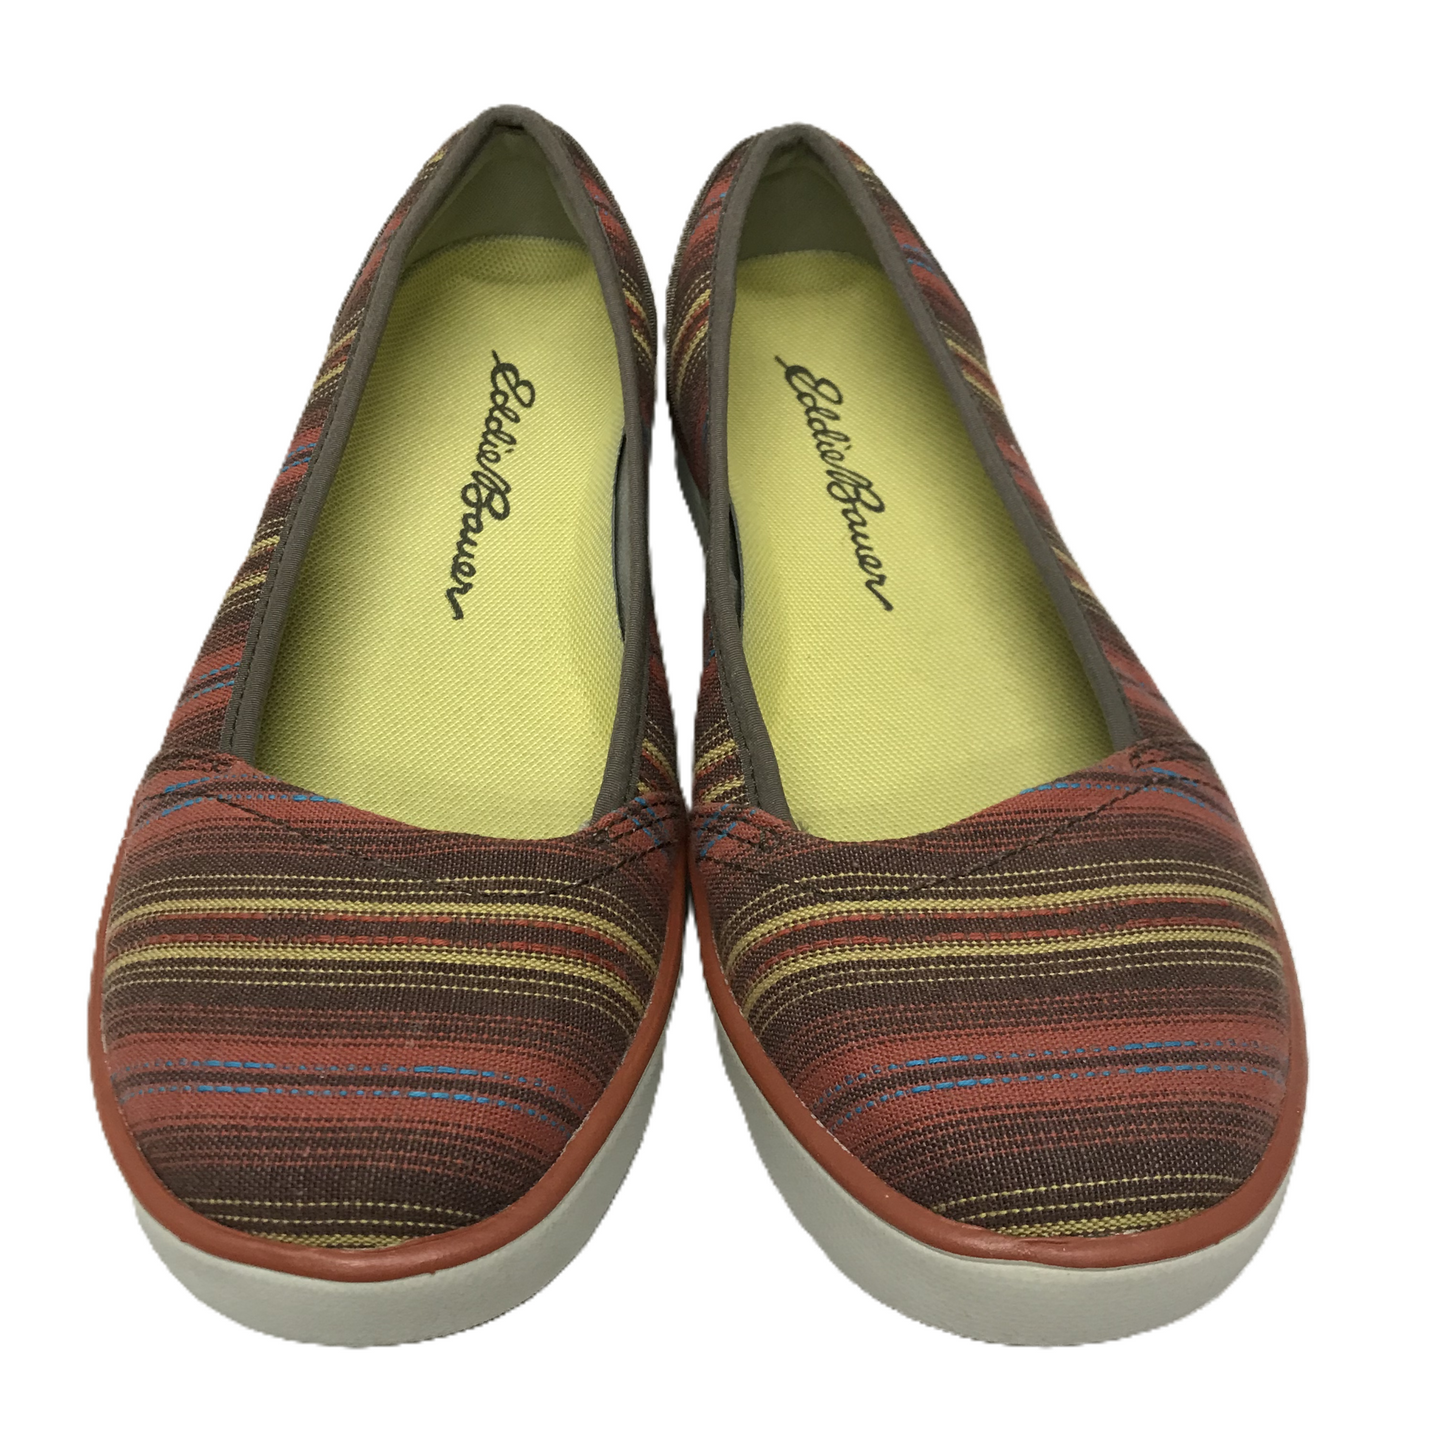 Multi-colored Shoes Flats By Eddie Bauer, Size: 9.5